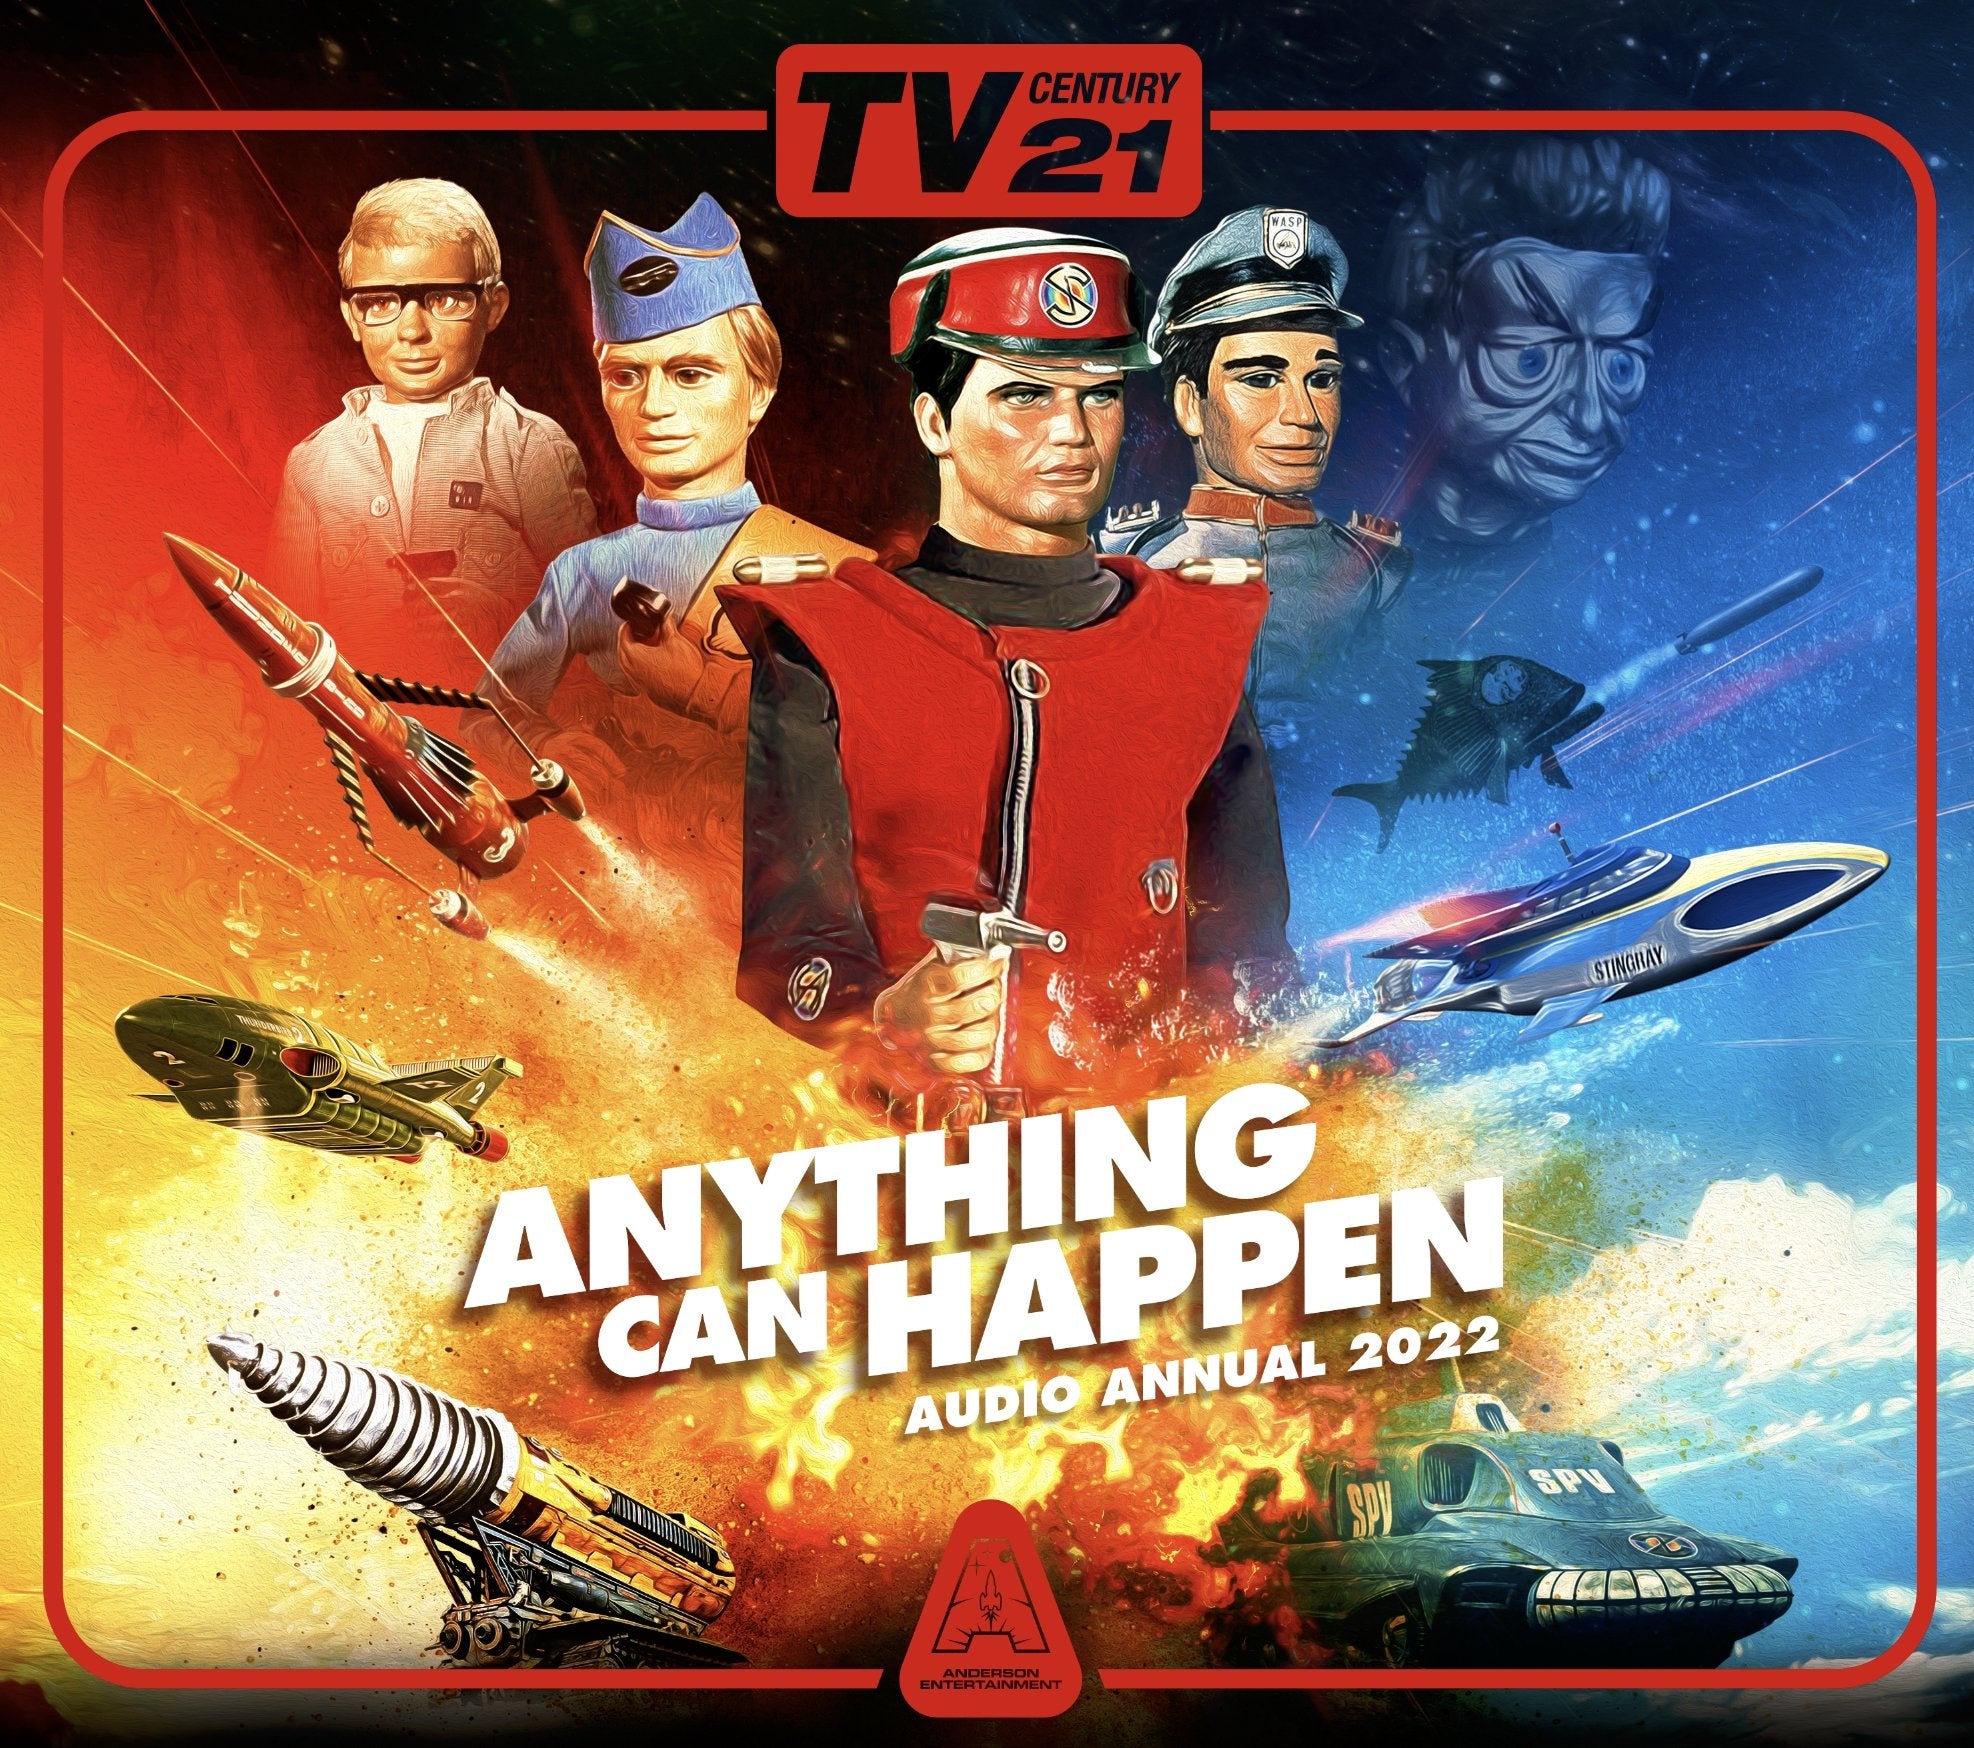 Nick Briggs on the New Audio Annual - The Gerry Anderson Store